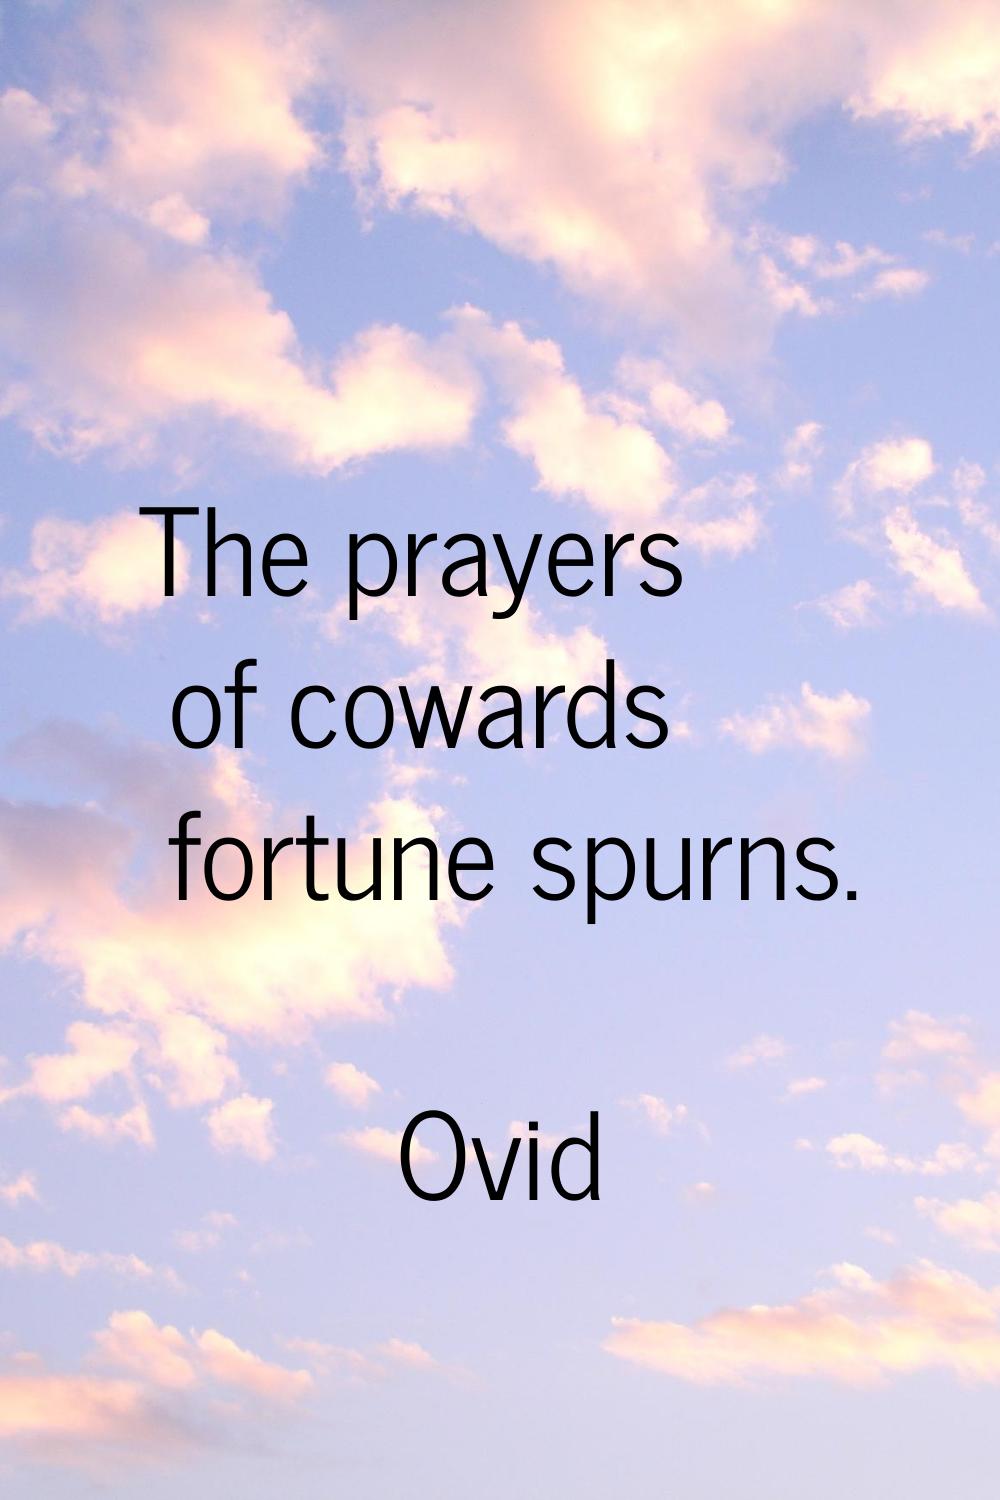 The prayers of cowards fortune spurns.